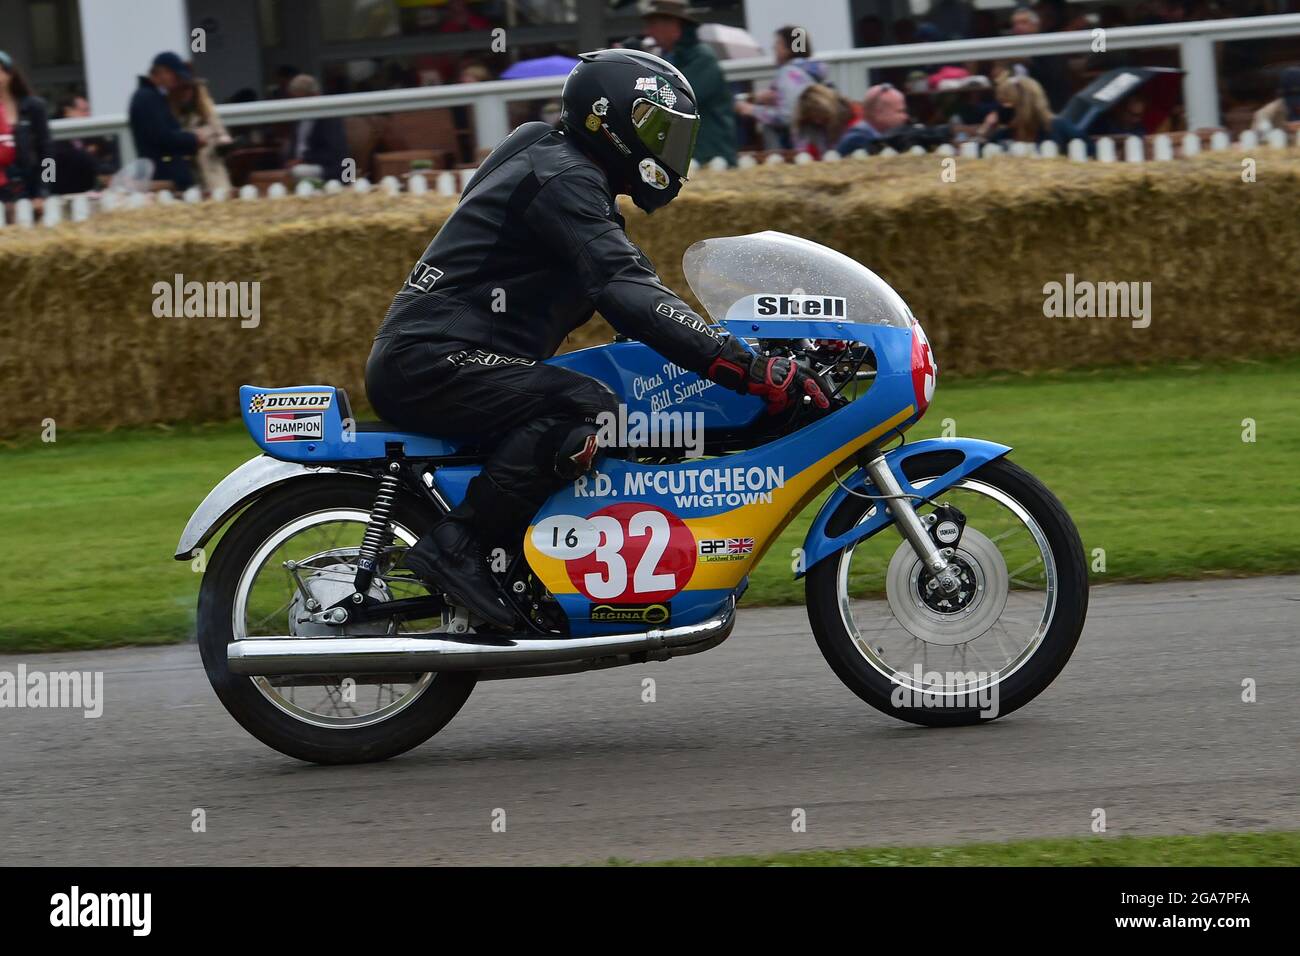 Chas Mortimer, Yamaha RD250, 110 Years of the Mountain Course, The Maestros - Motorsport's Great All-Rounders, Goodwood Festival of Speed, Goodwood Ho Stock Photo